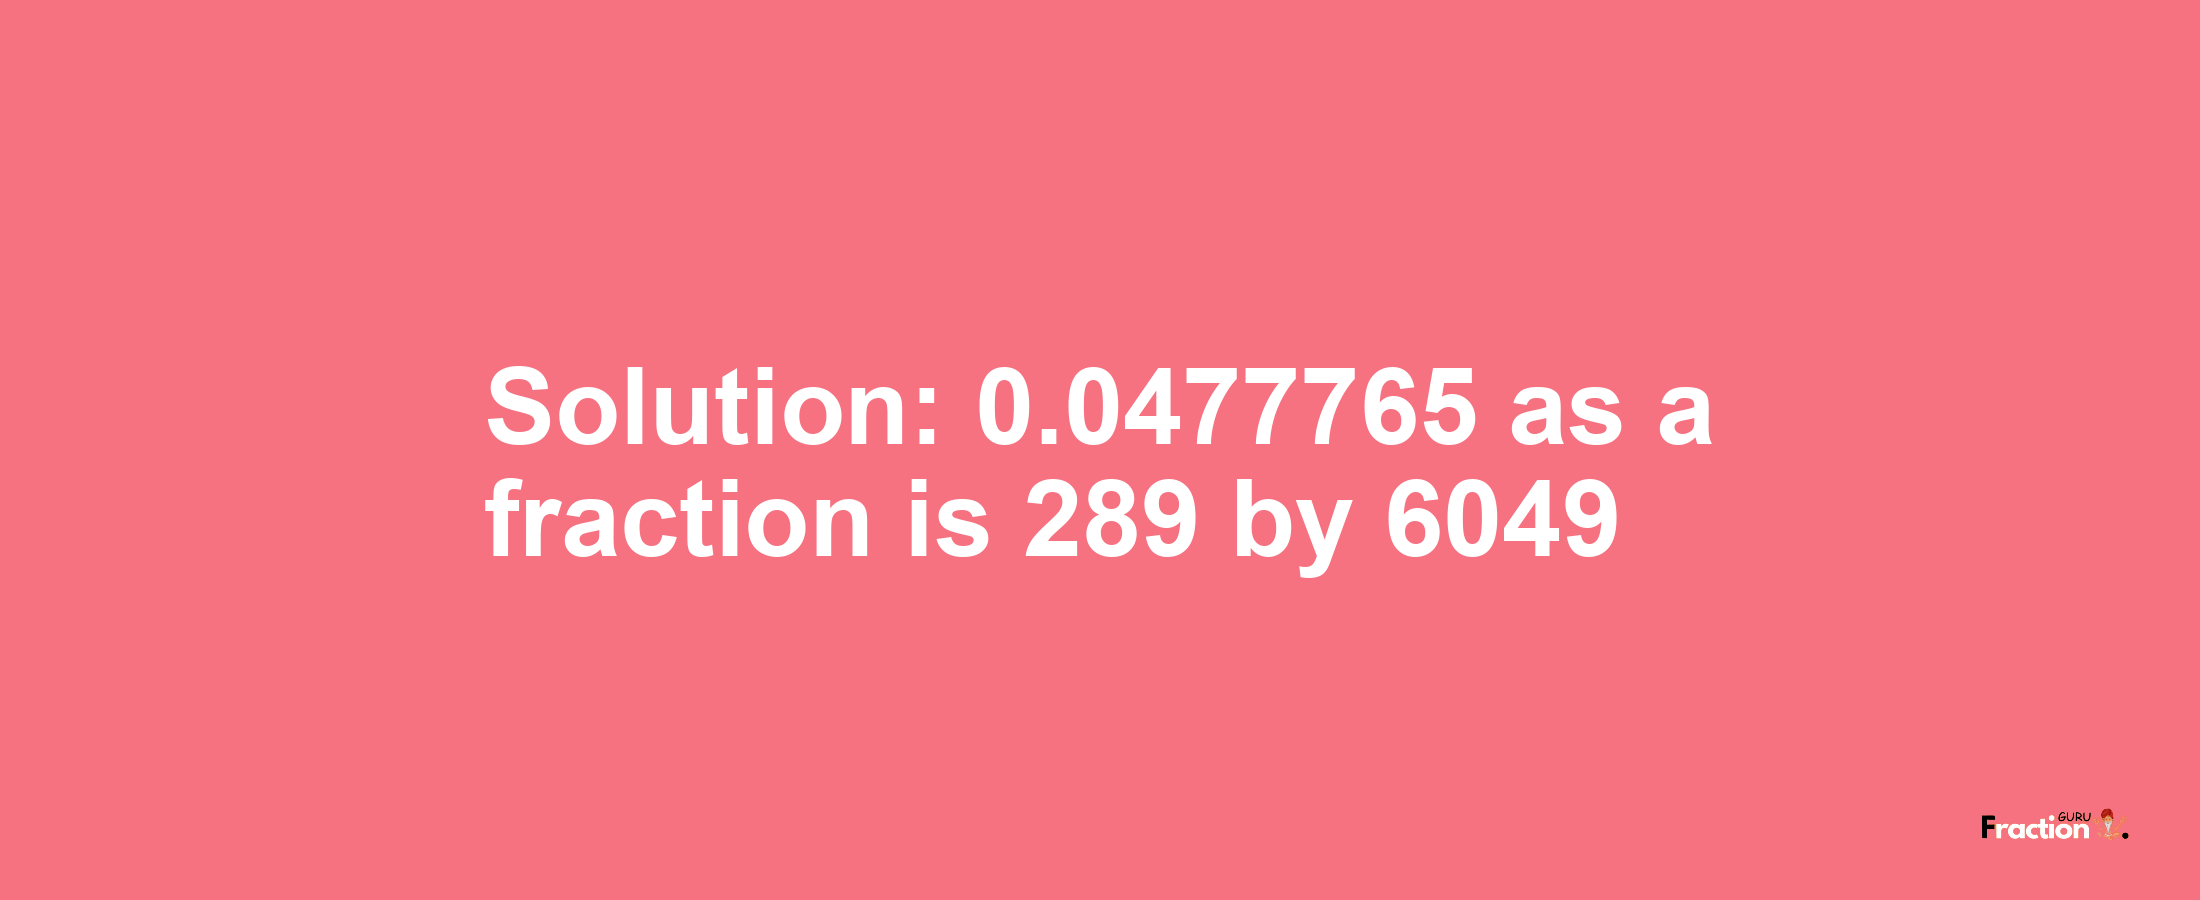 Solution:0.0477765 as a fraction is 289/6049